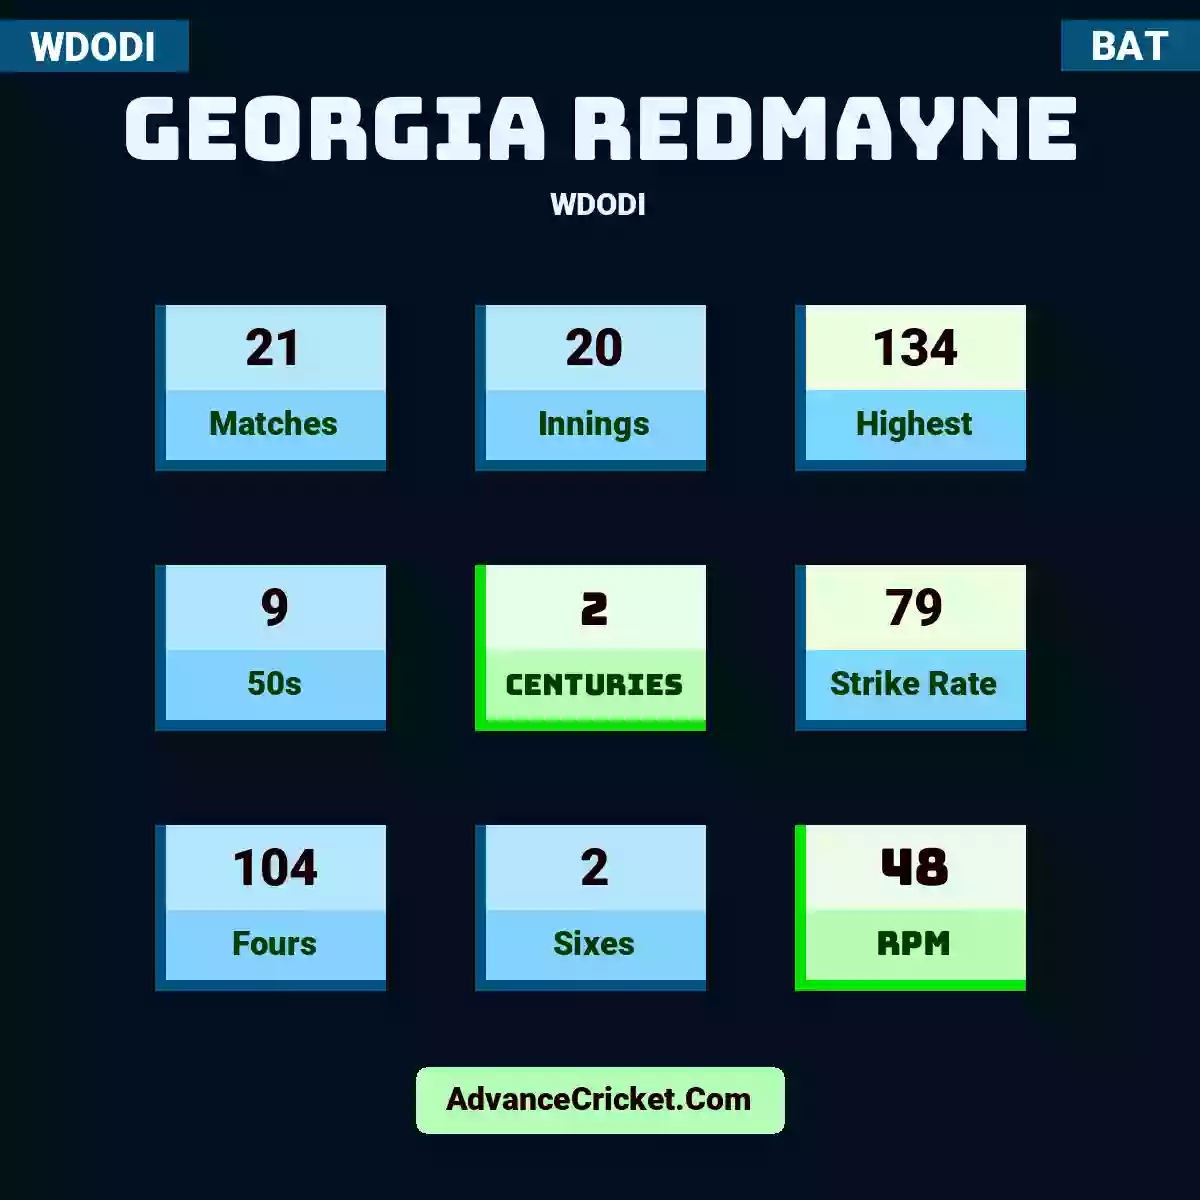 Georgia Redmayne WDODI , Georgia Redmayne played 21 matches, scored 134 runs as highest, 9 half-centuries, and 2 centuries, with a strike rate of 79. G.Redmayne hit 104 fours and 2 sixes, with an RPM of 48.